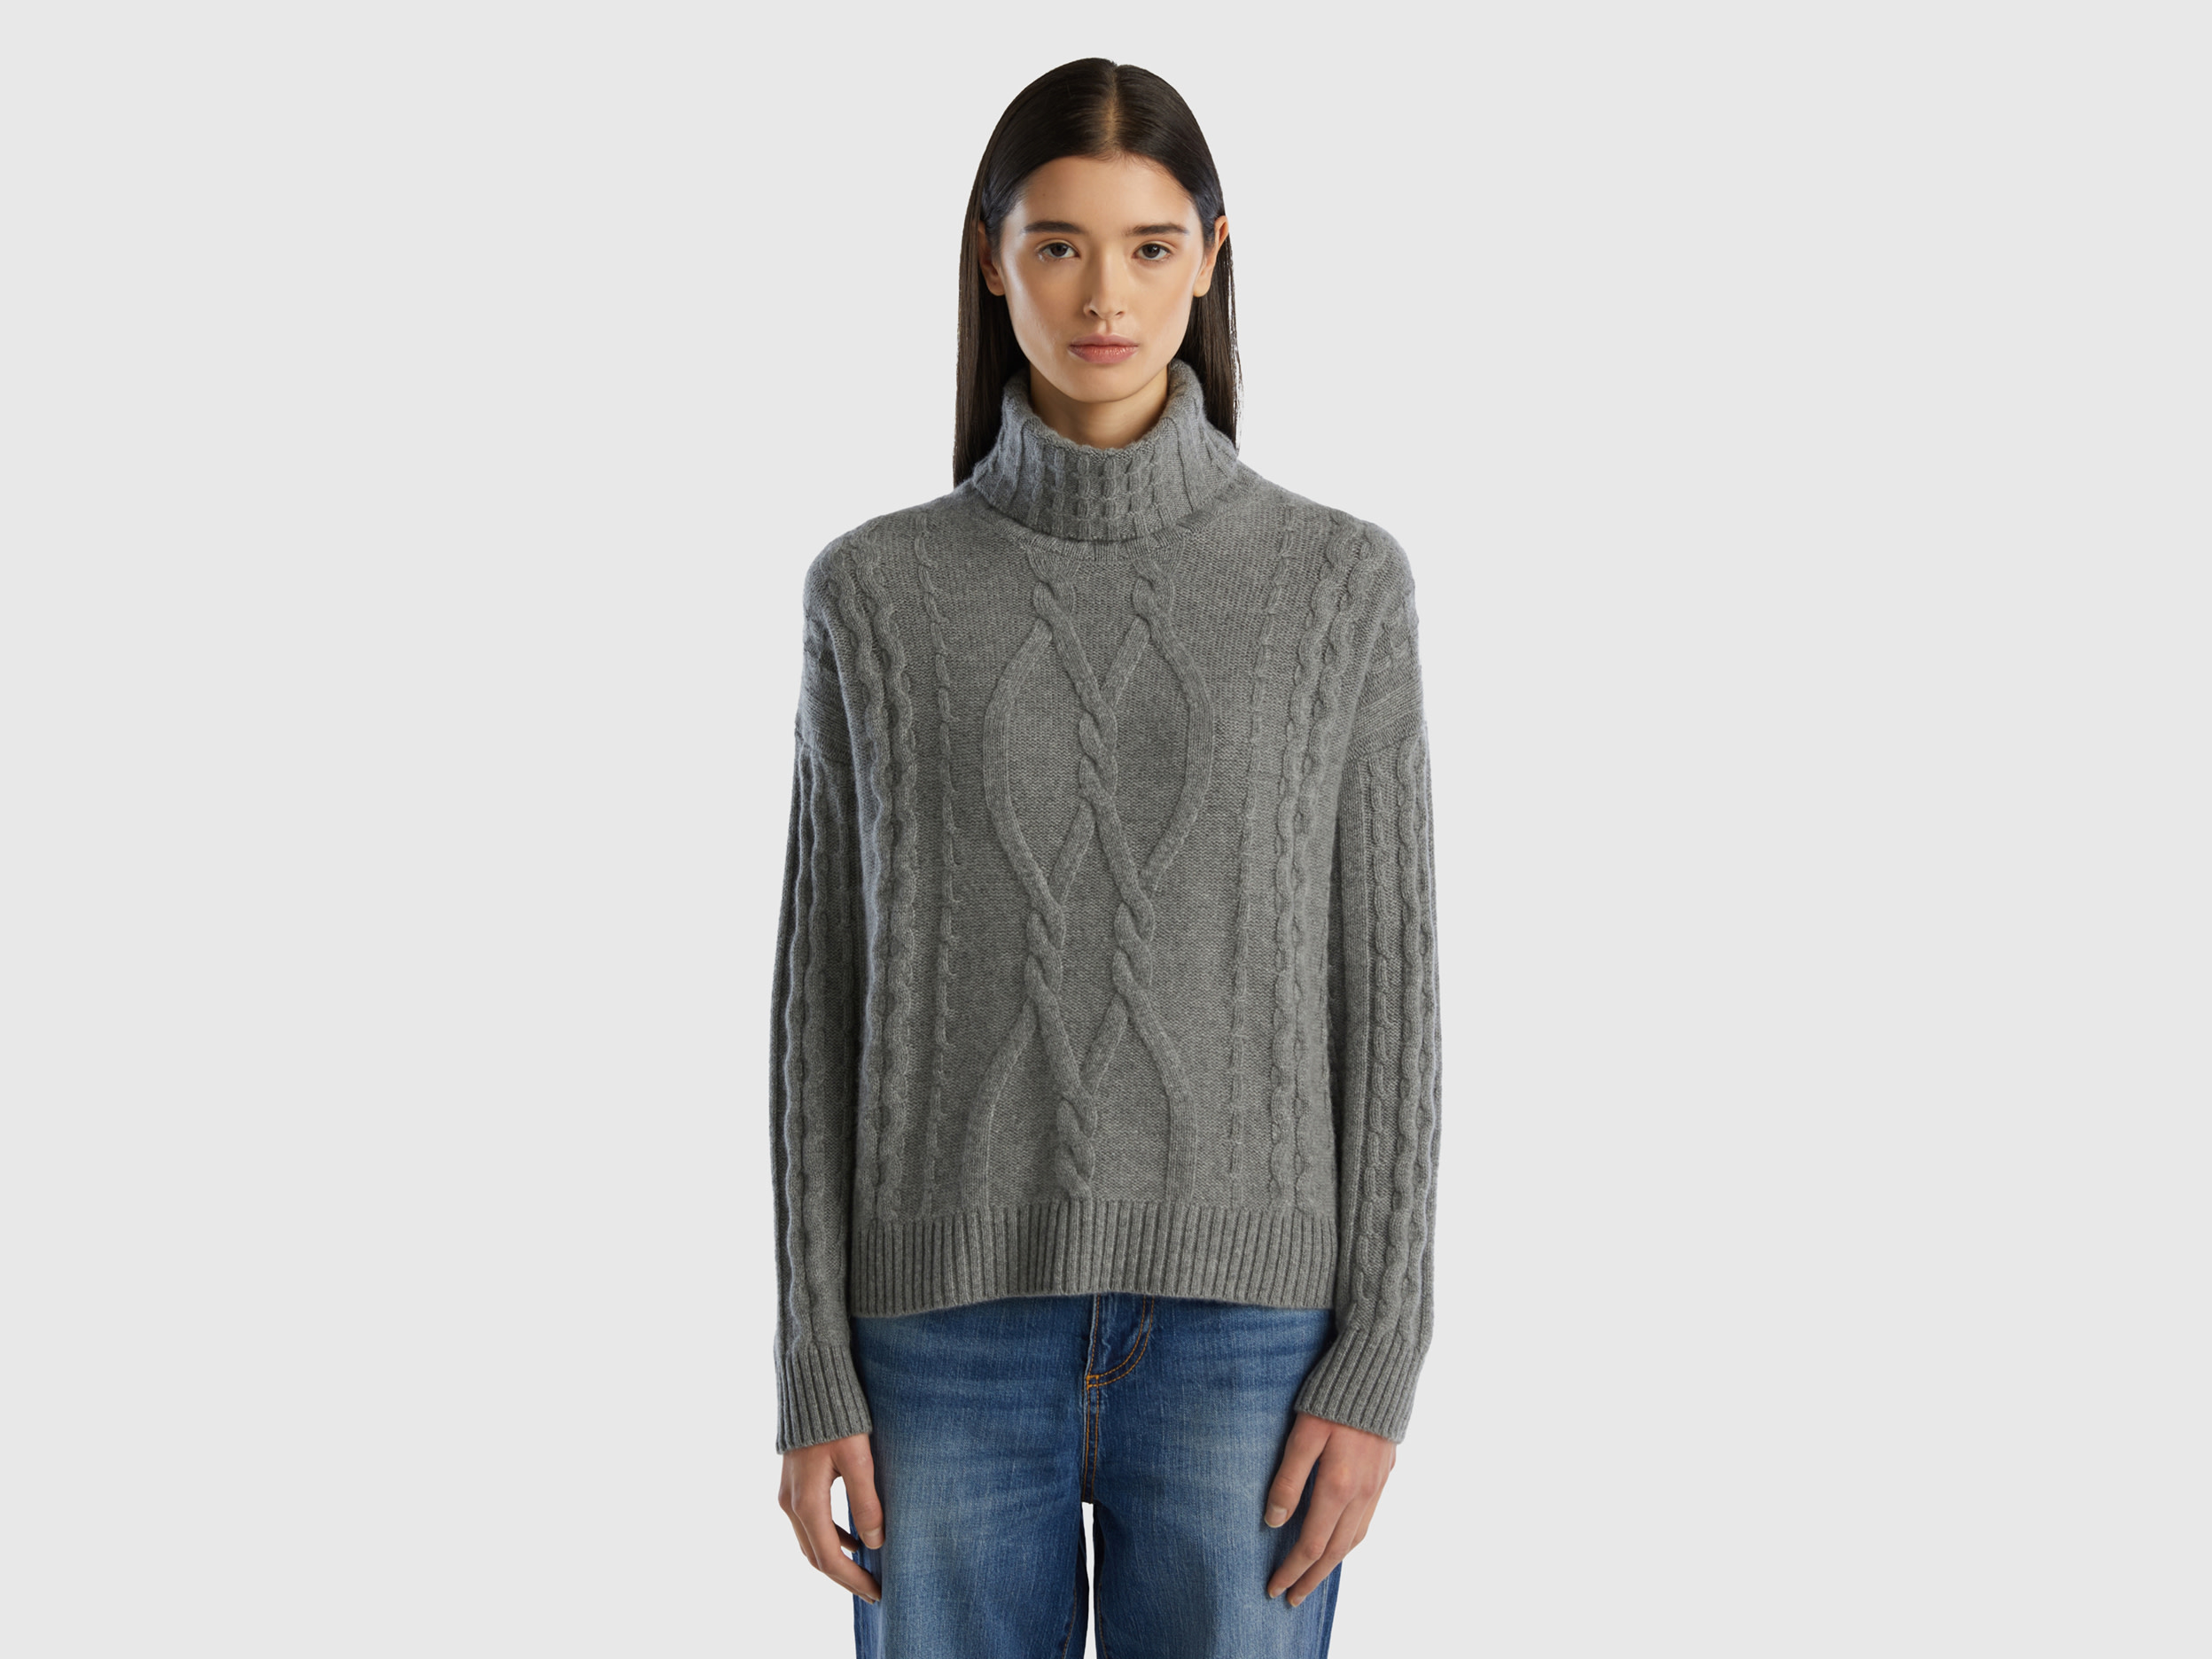 Benetton, Pure Cashmere Turtleneck With Cable Knit, size L, Dark Gray, Women